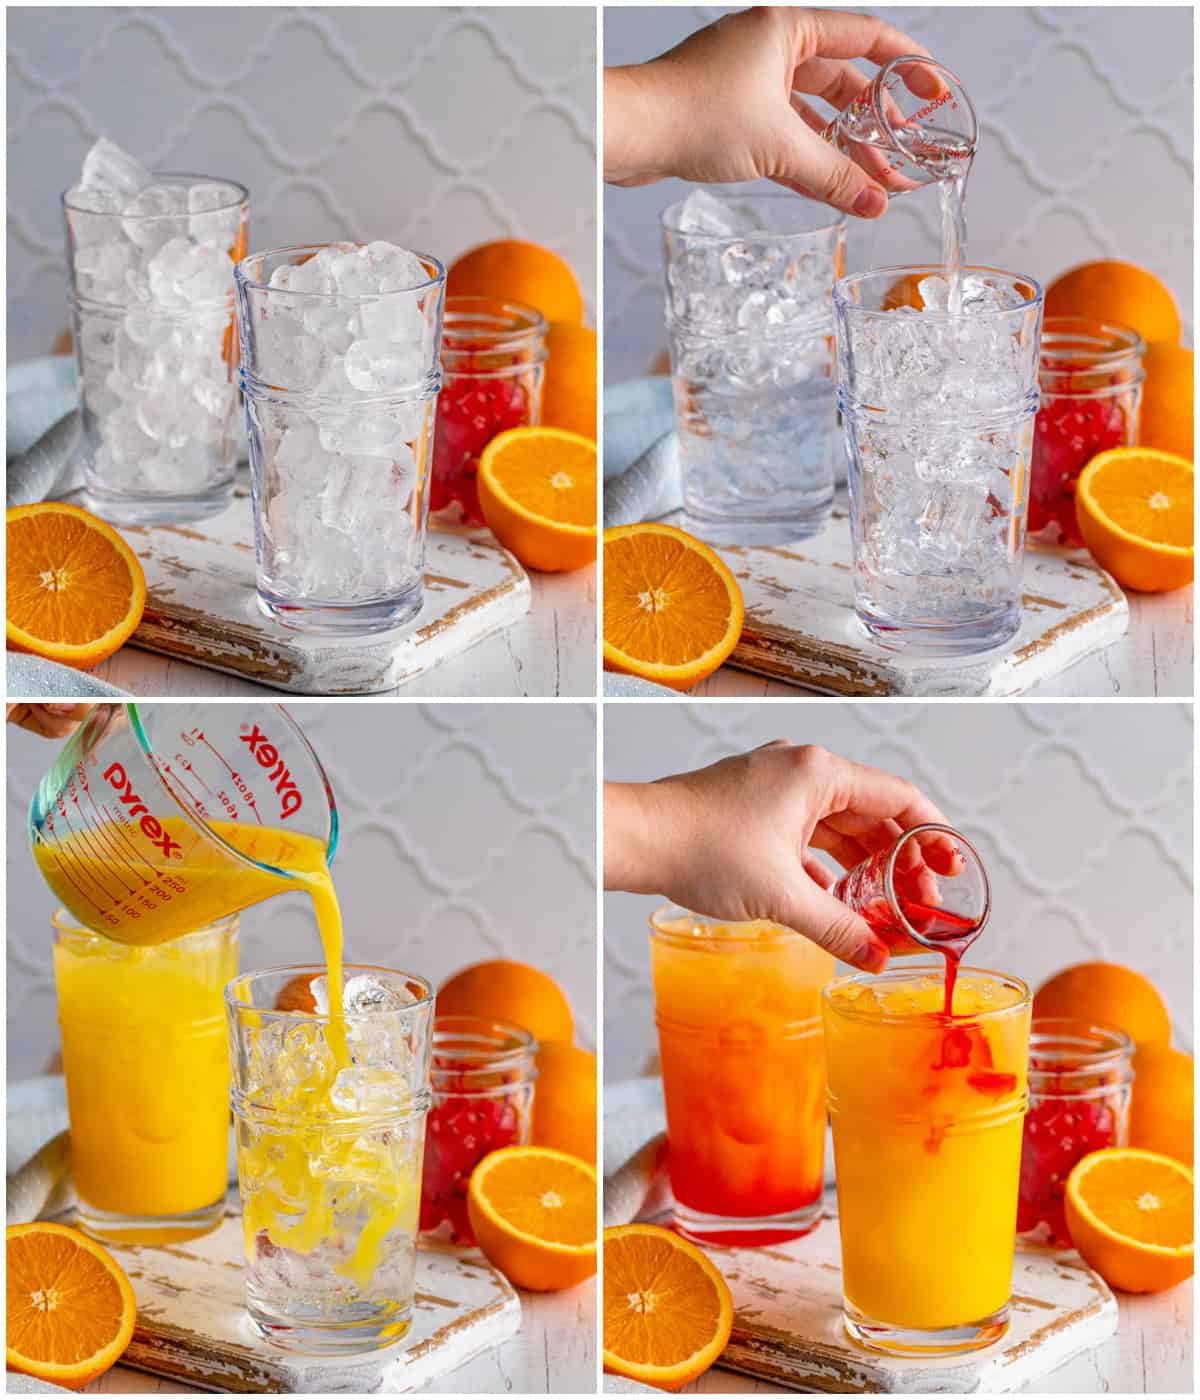 Step by step photos on how to make a Tequila Sunrise Recipe.